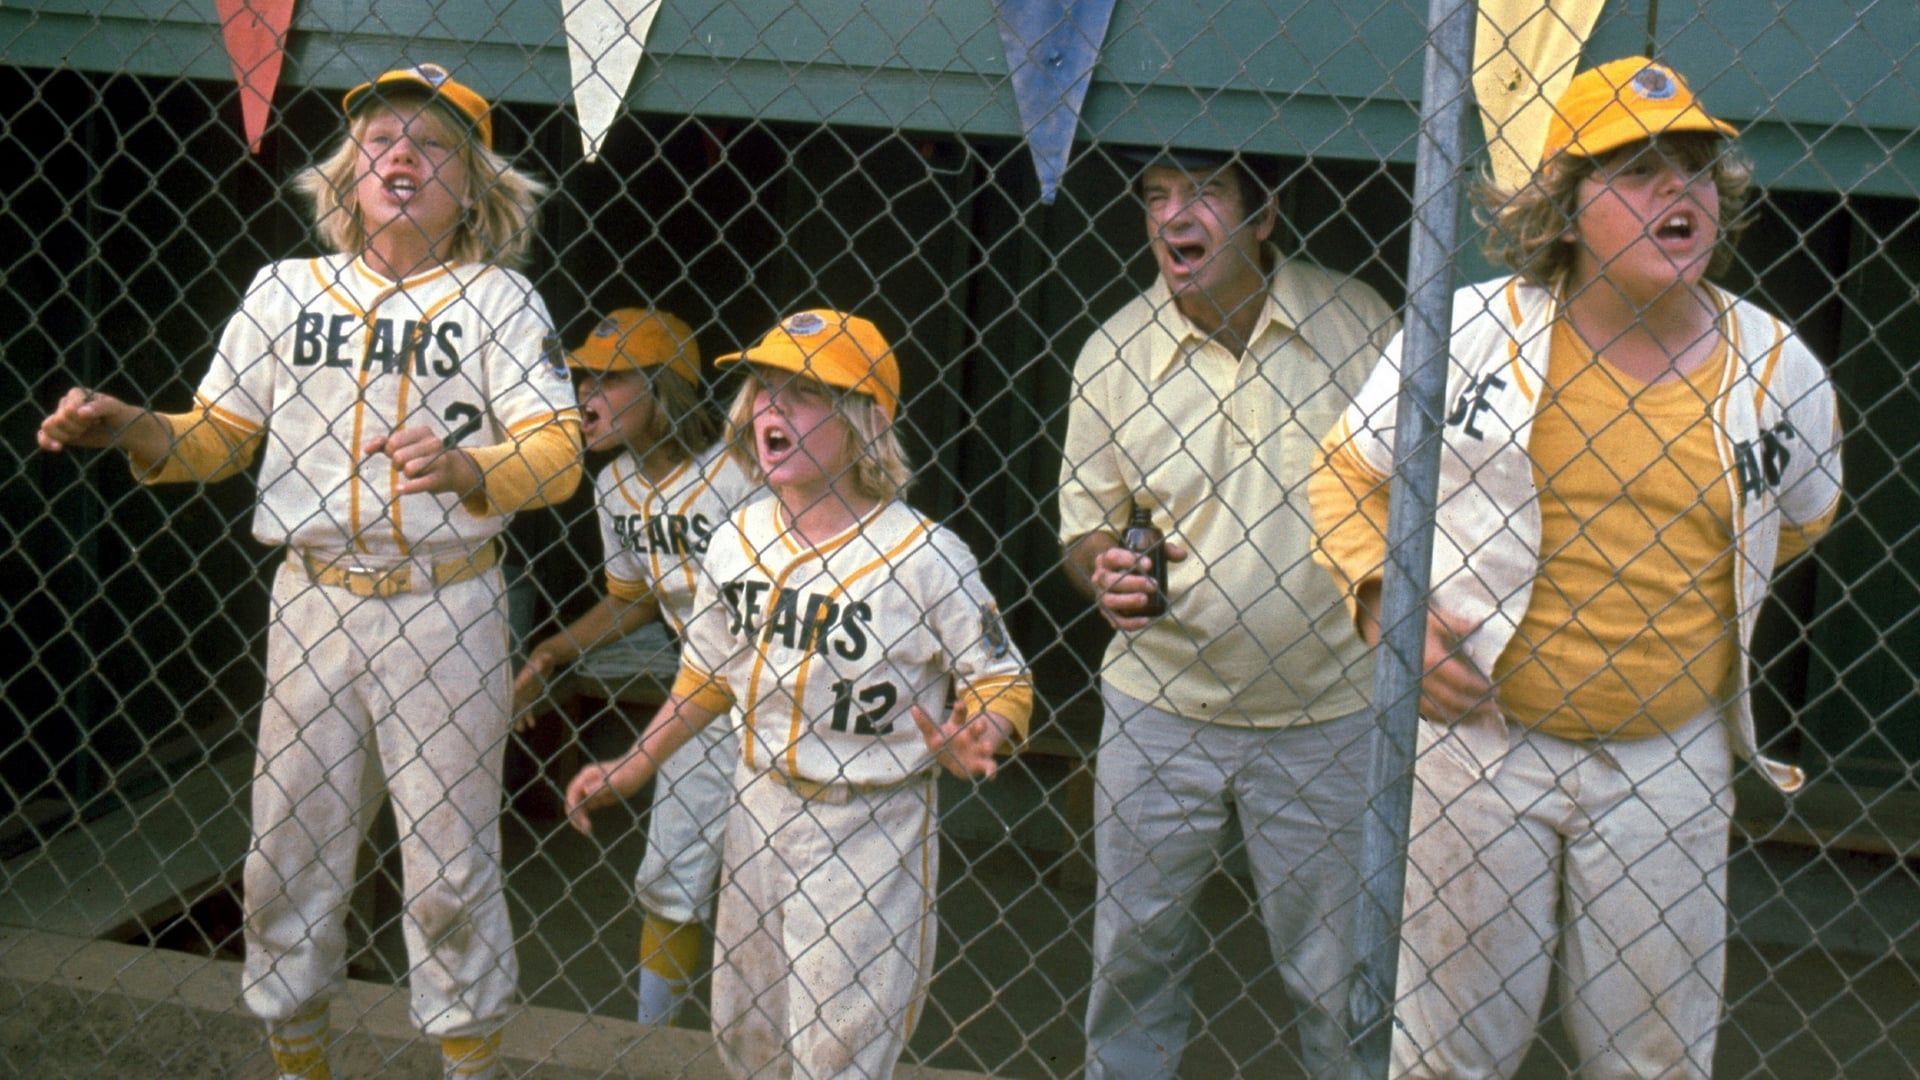 The Bad News Bears background